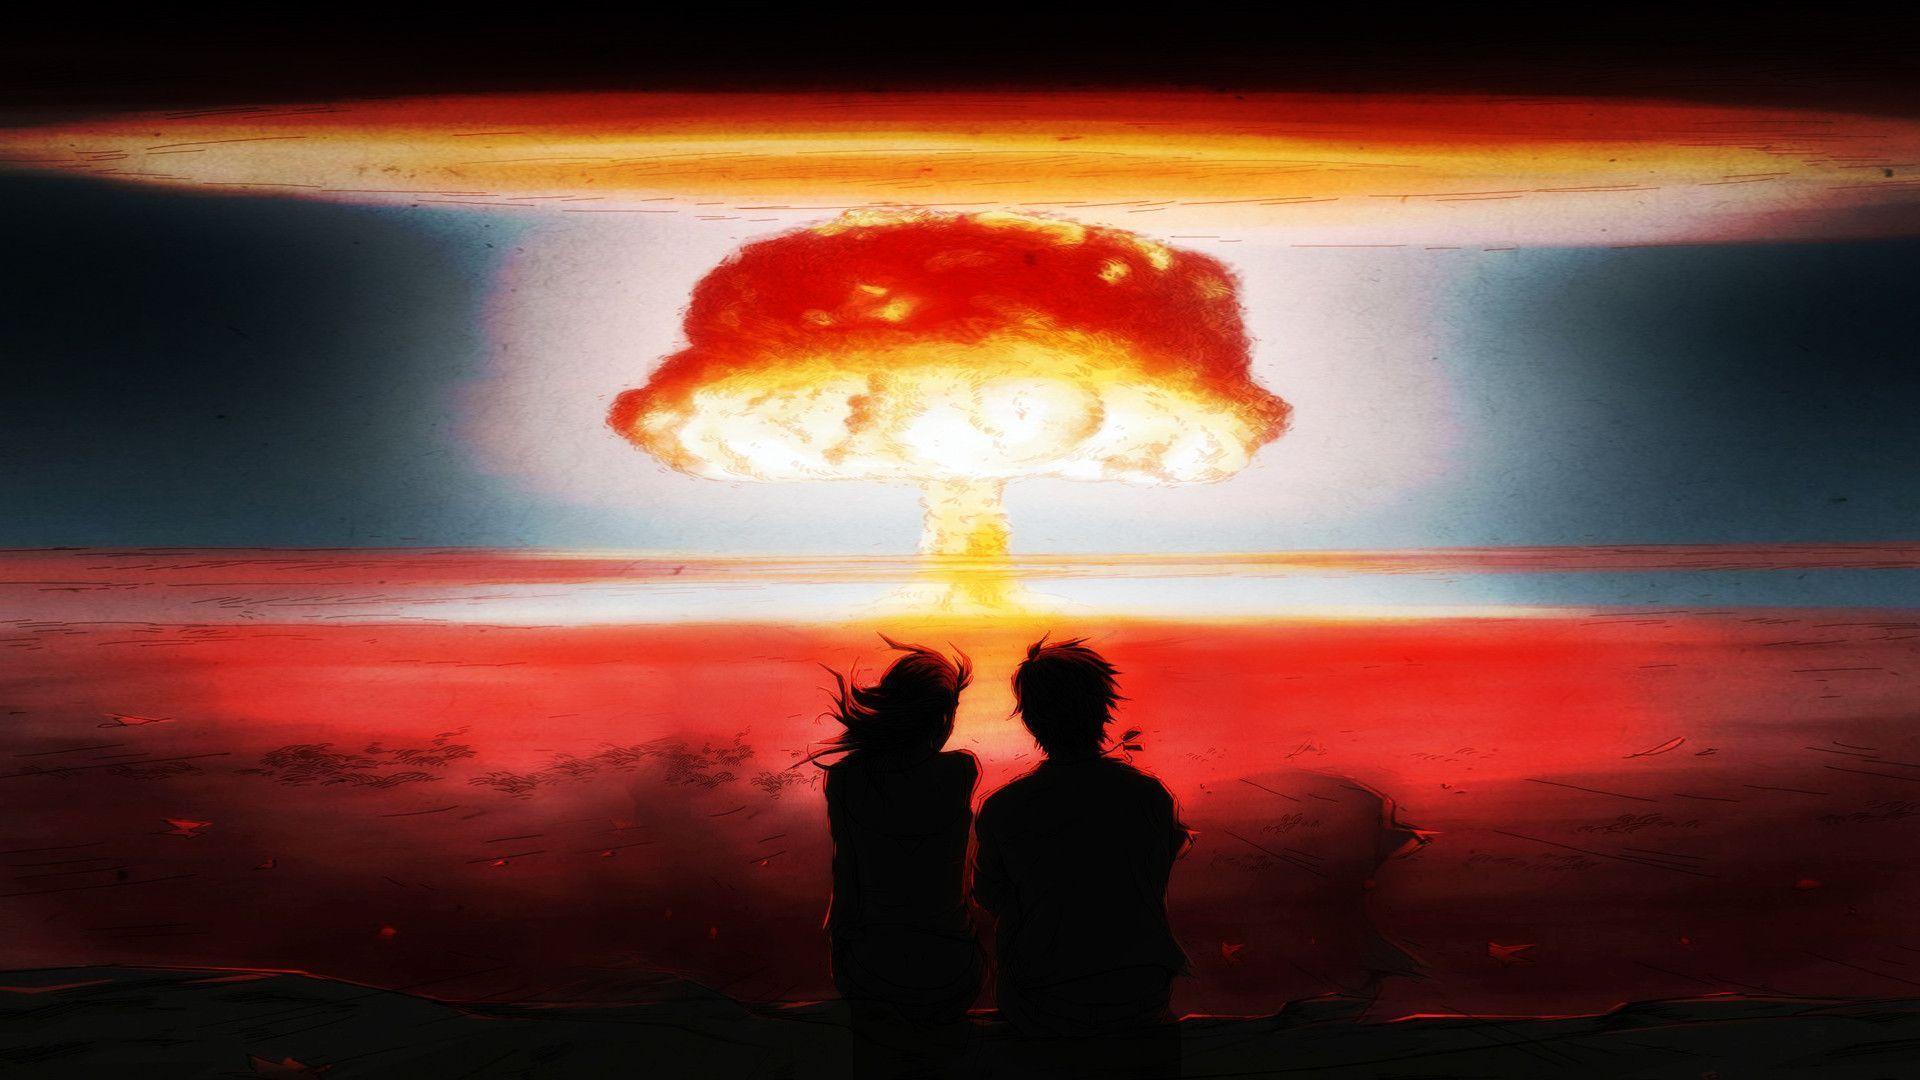 Nuclear Explosion Mushroom Cloud HD Image & Picture